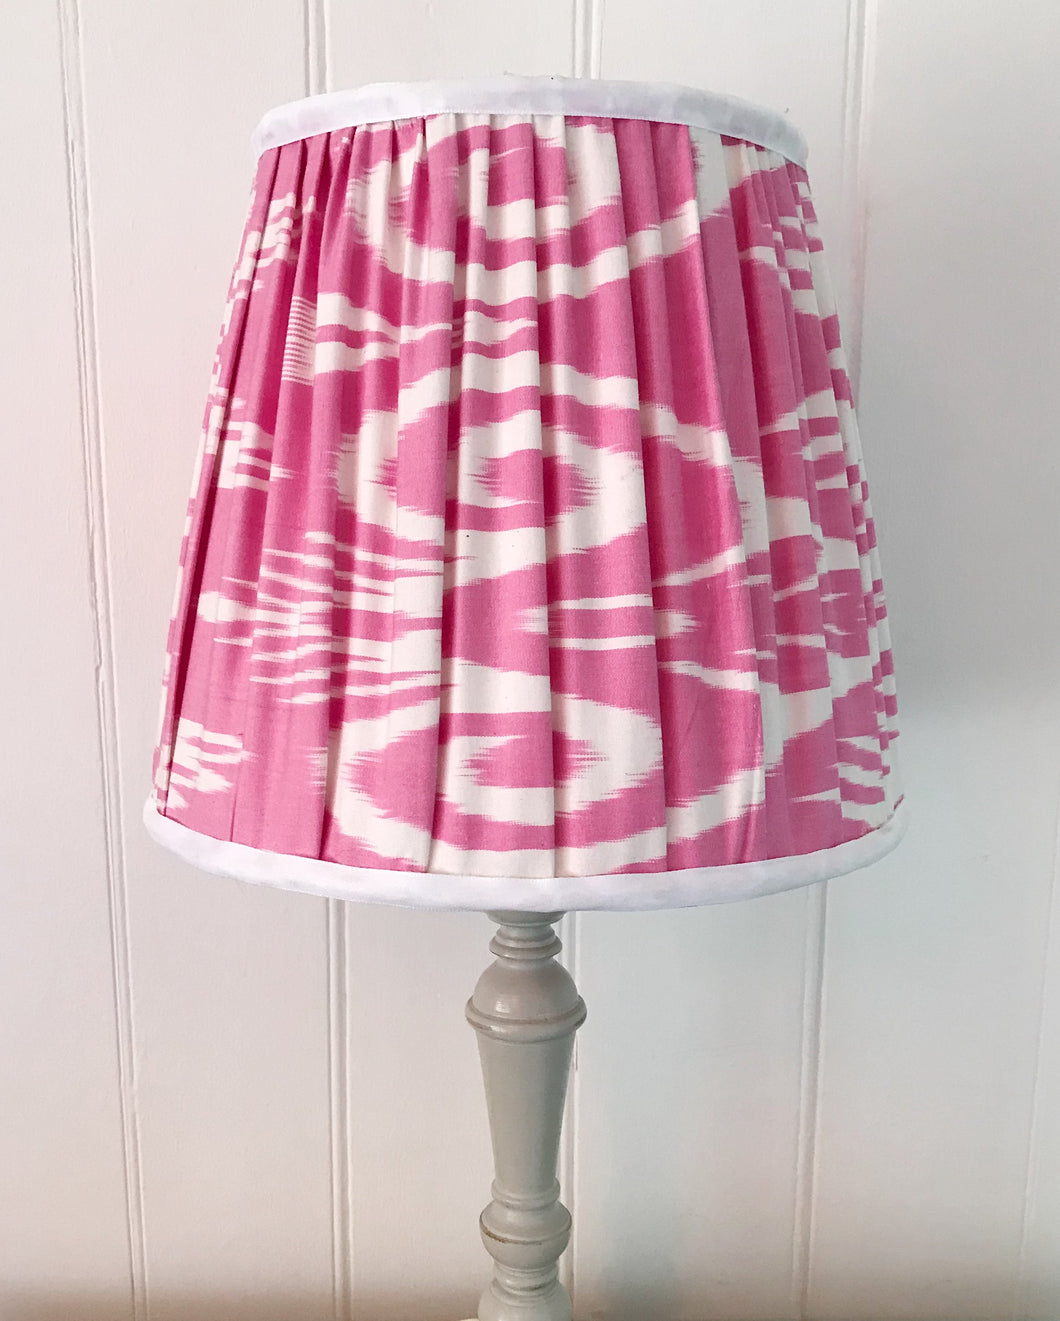 30cm Pleated Lampshade - Pink & White Ikat Silk